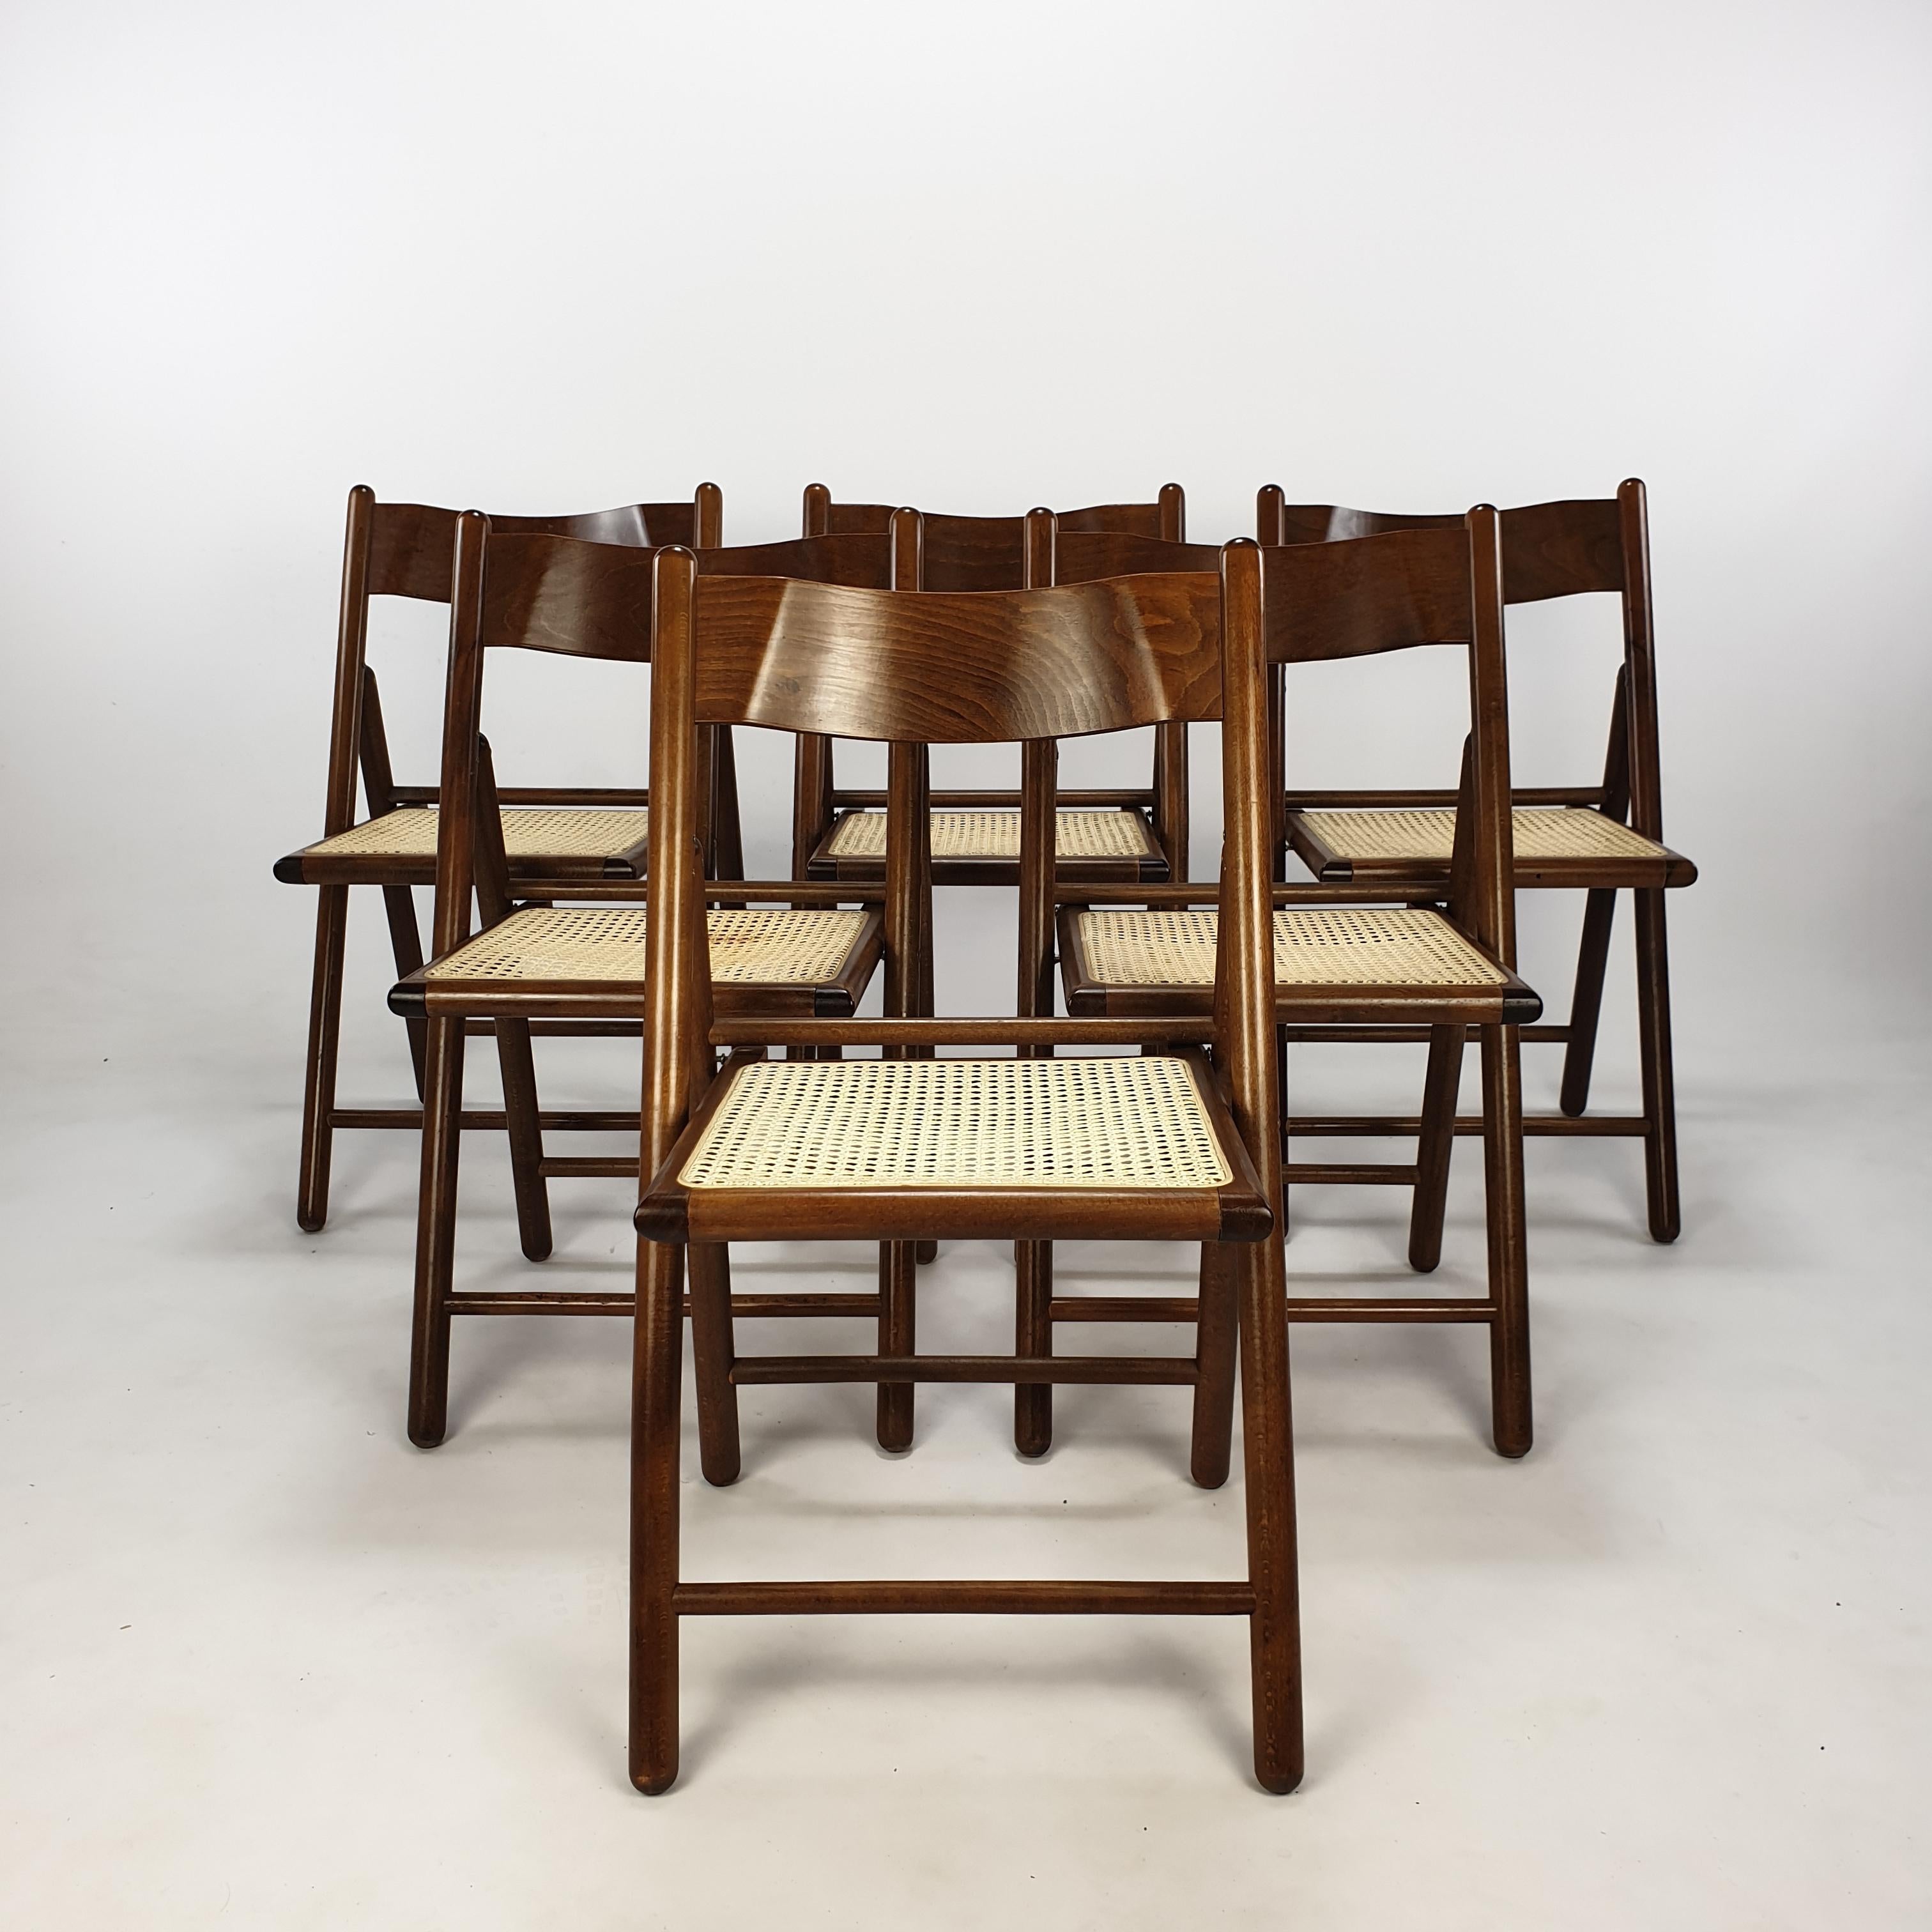 Very nice set of 6 Italian folding chairs, fabricated in the 80's.

The seating of the chairs are made of rattan.
The structure is made of solid wood.

The chairs are in good vintage condition.